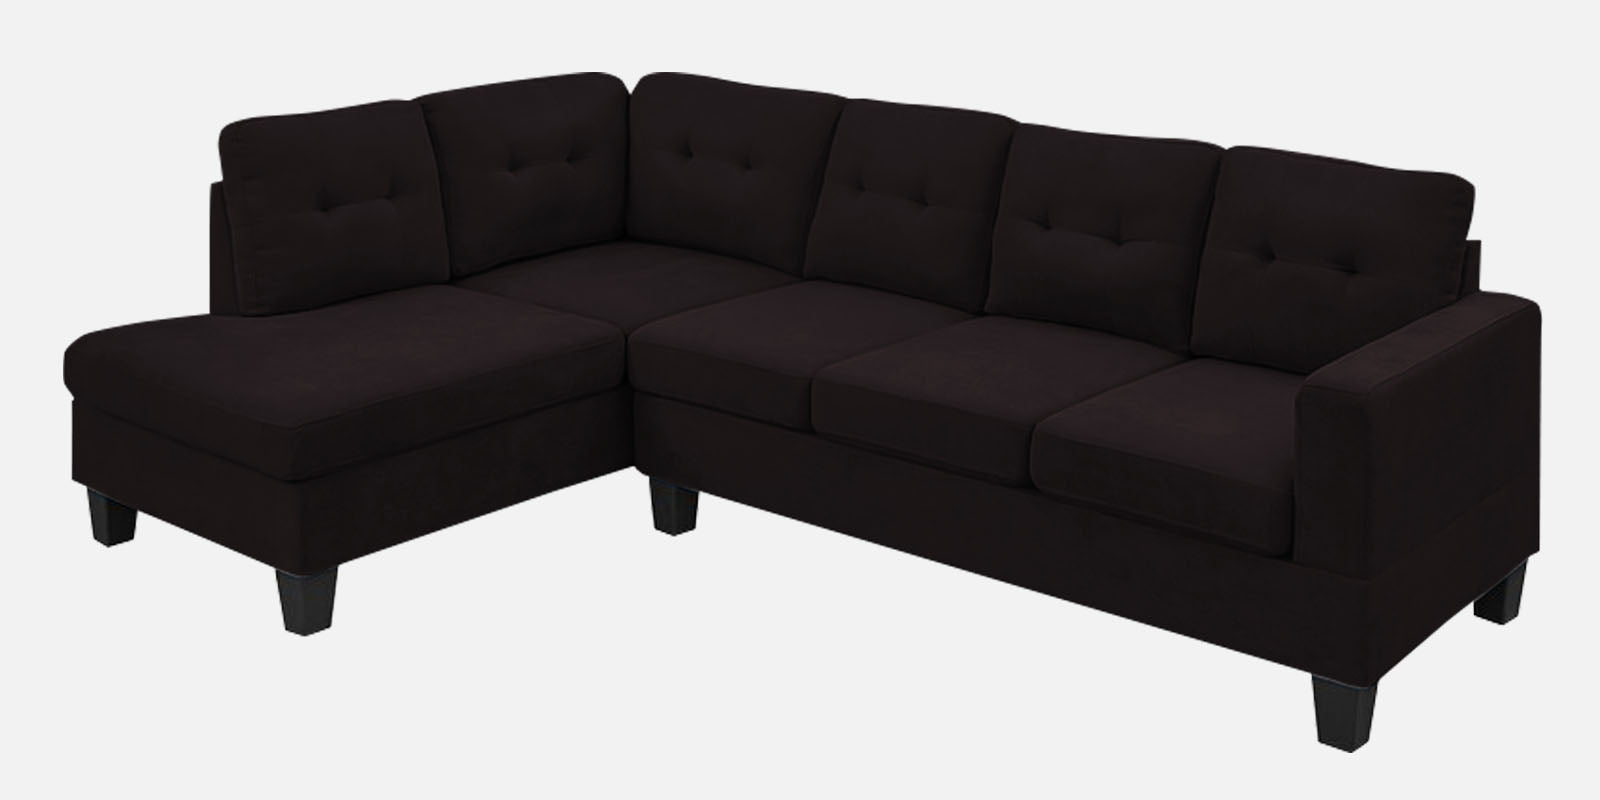 Thomas Fabric RHS Sectional Sofa (3+Lounger) in Cara Brown Colour